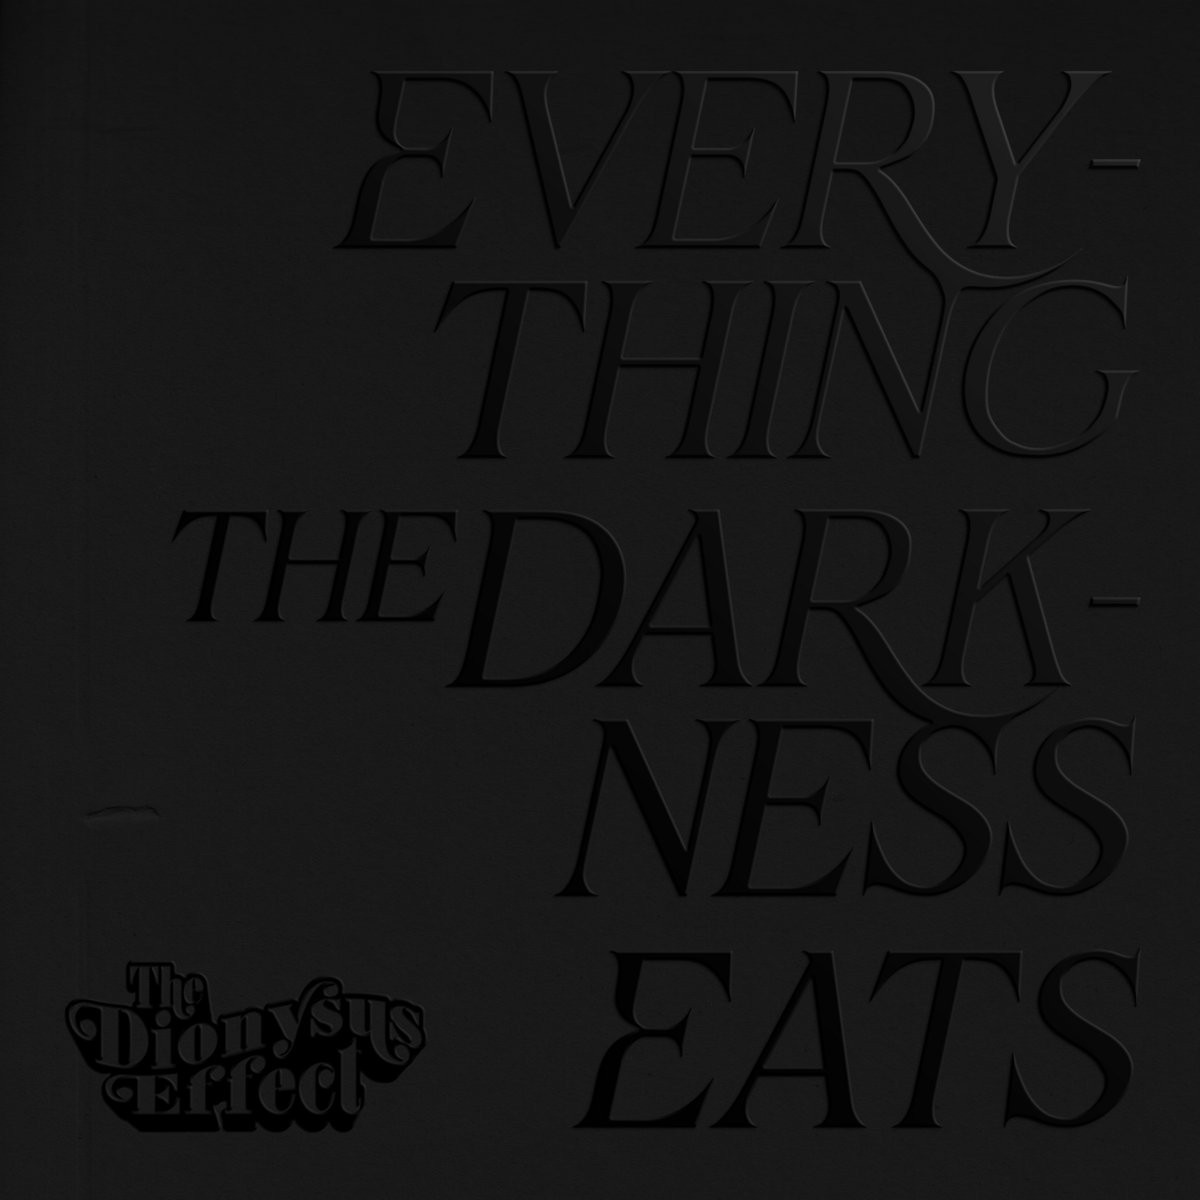 The Dionysus Effect “Everything the Darkness Eats” single artwork